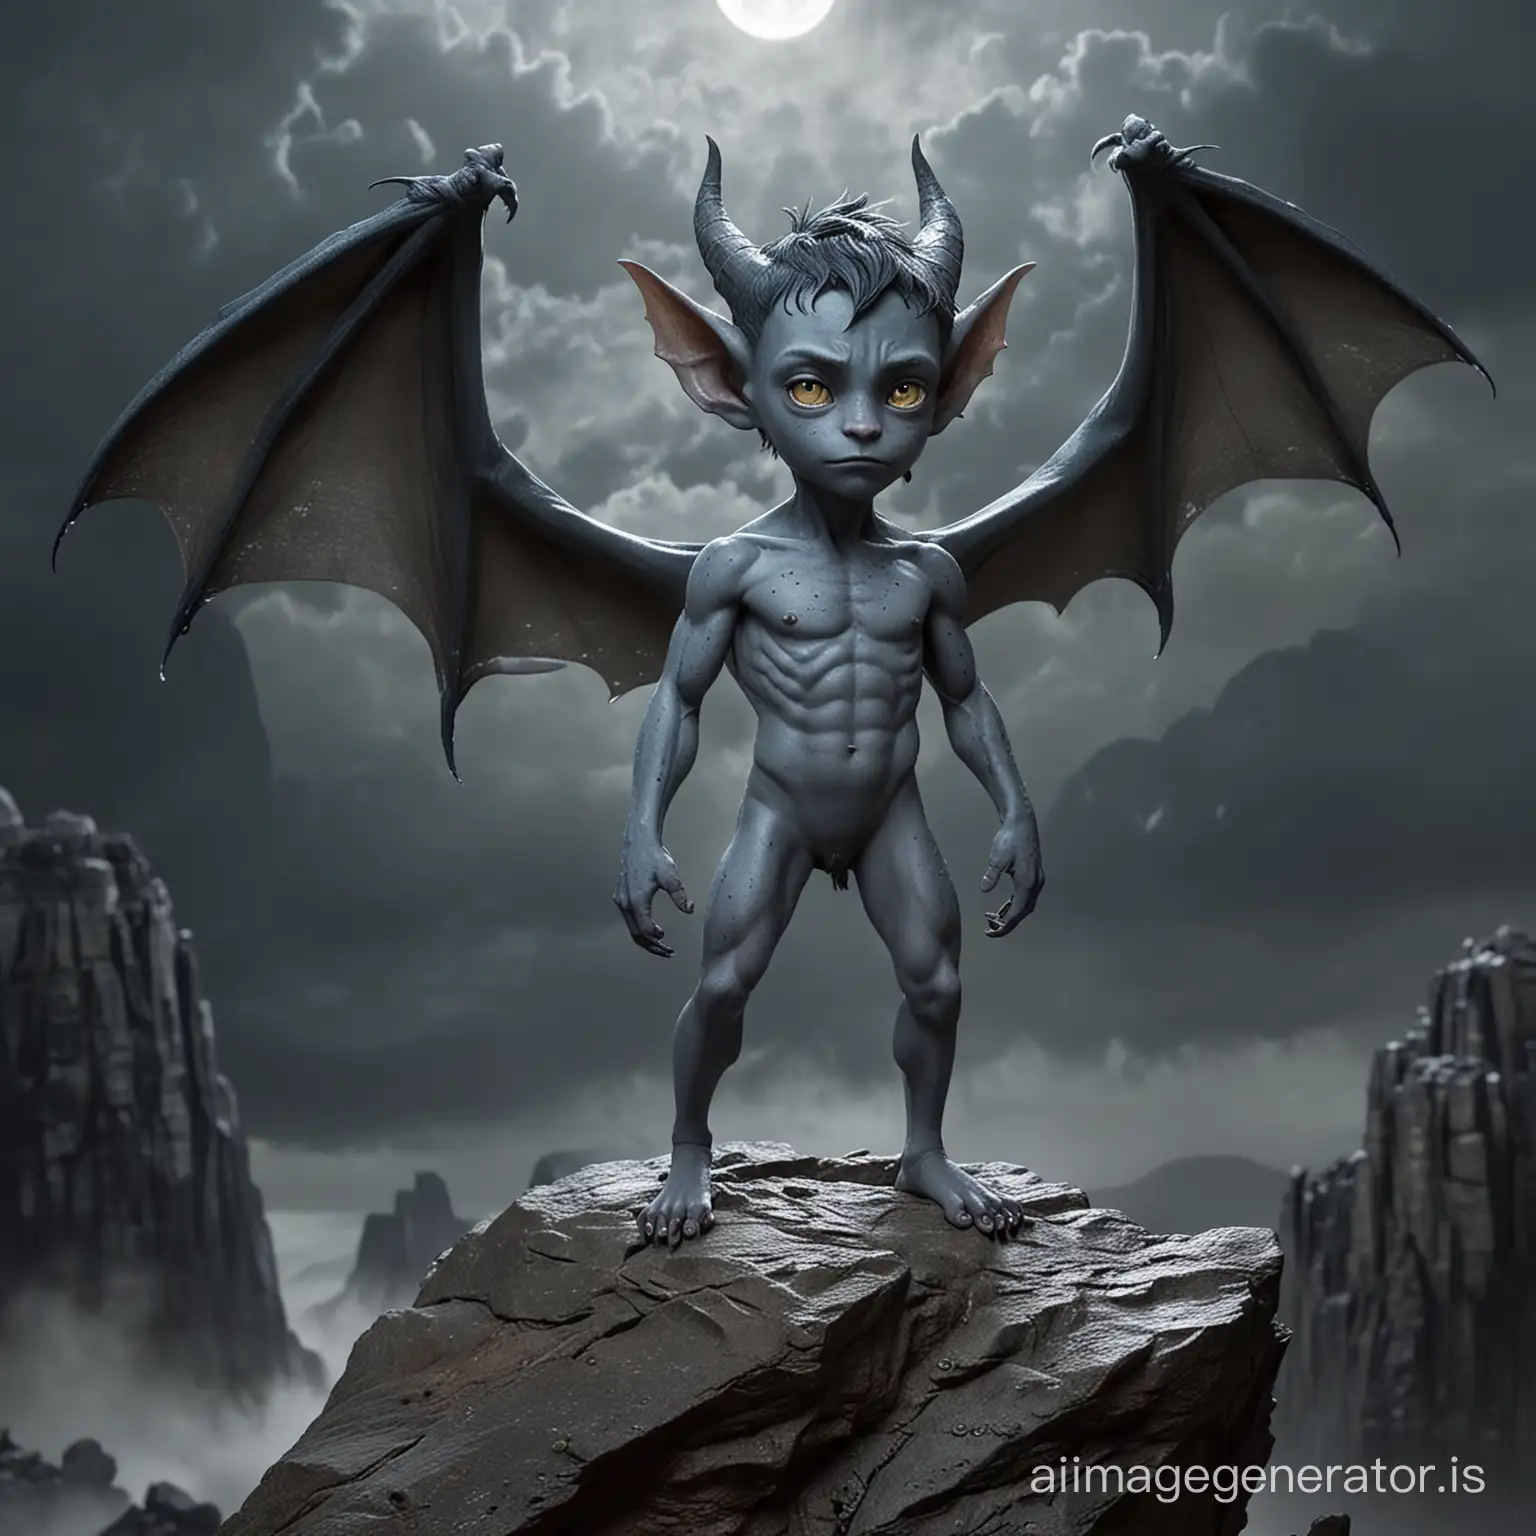 Mysterious-GreyBlue-Skinned-Boy-with-Bat-Wings-and-Tail